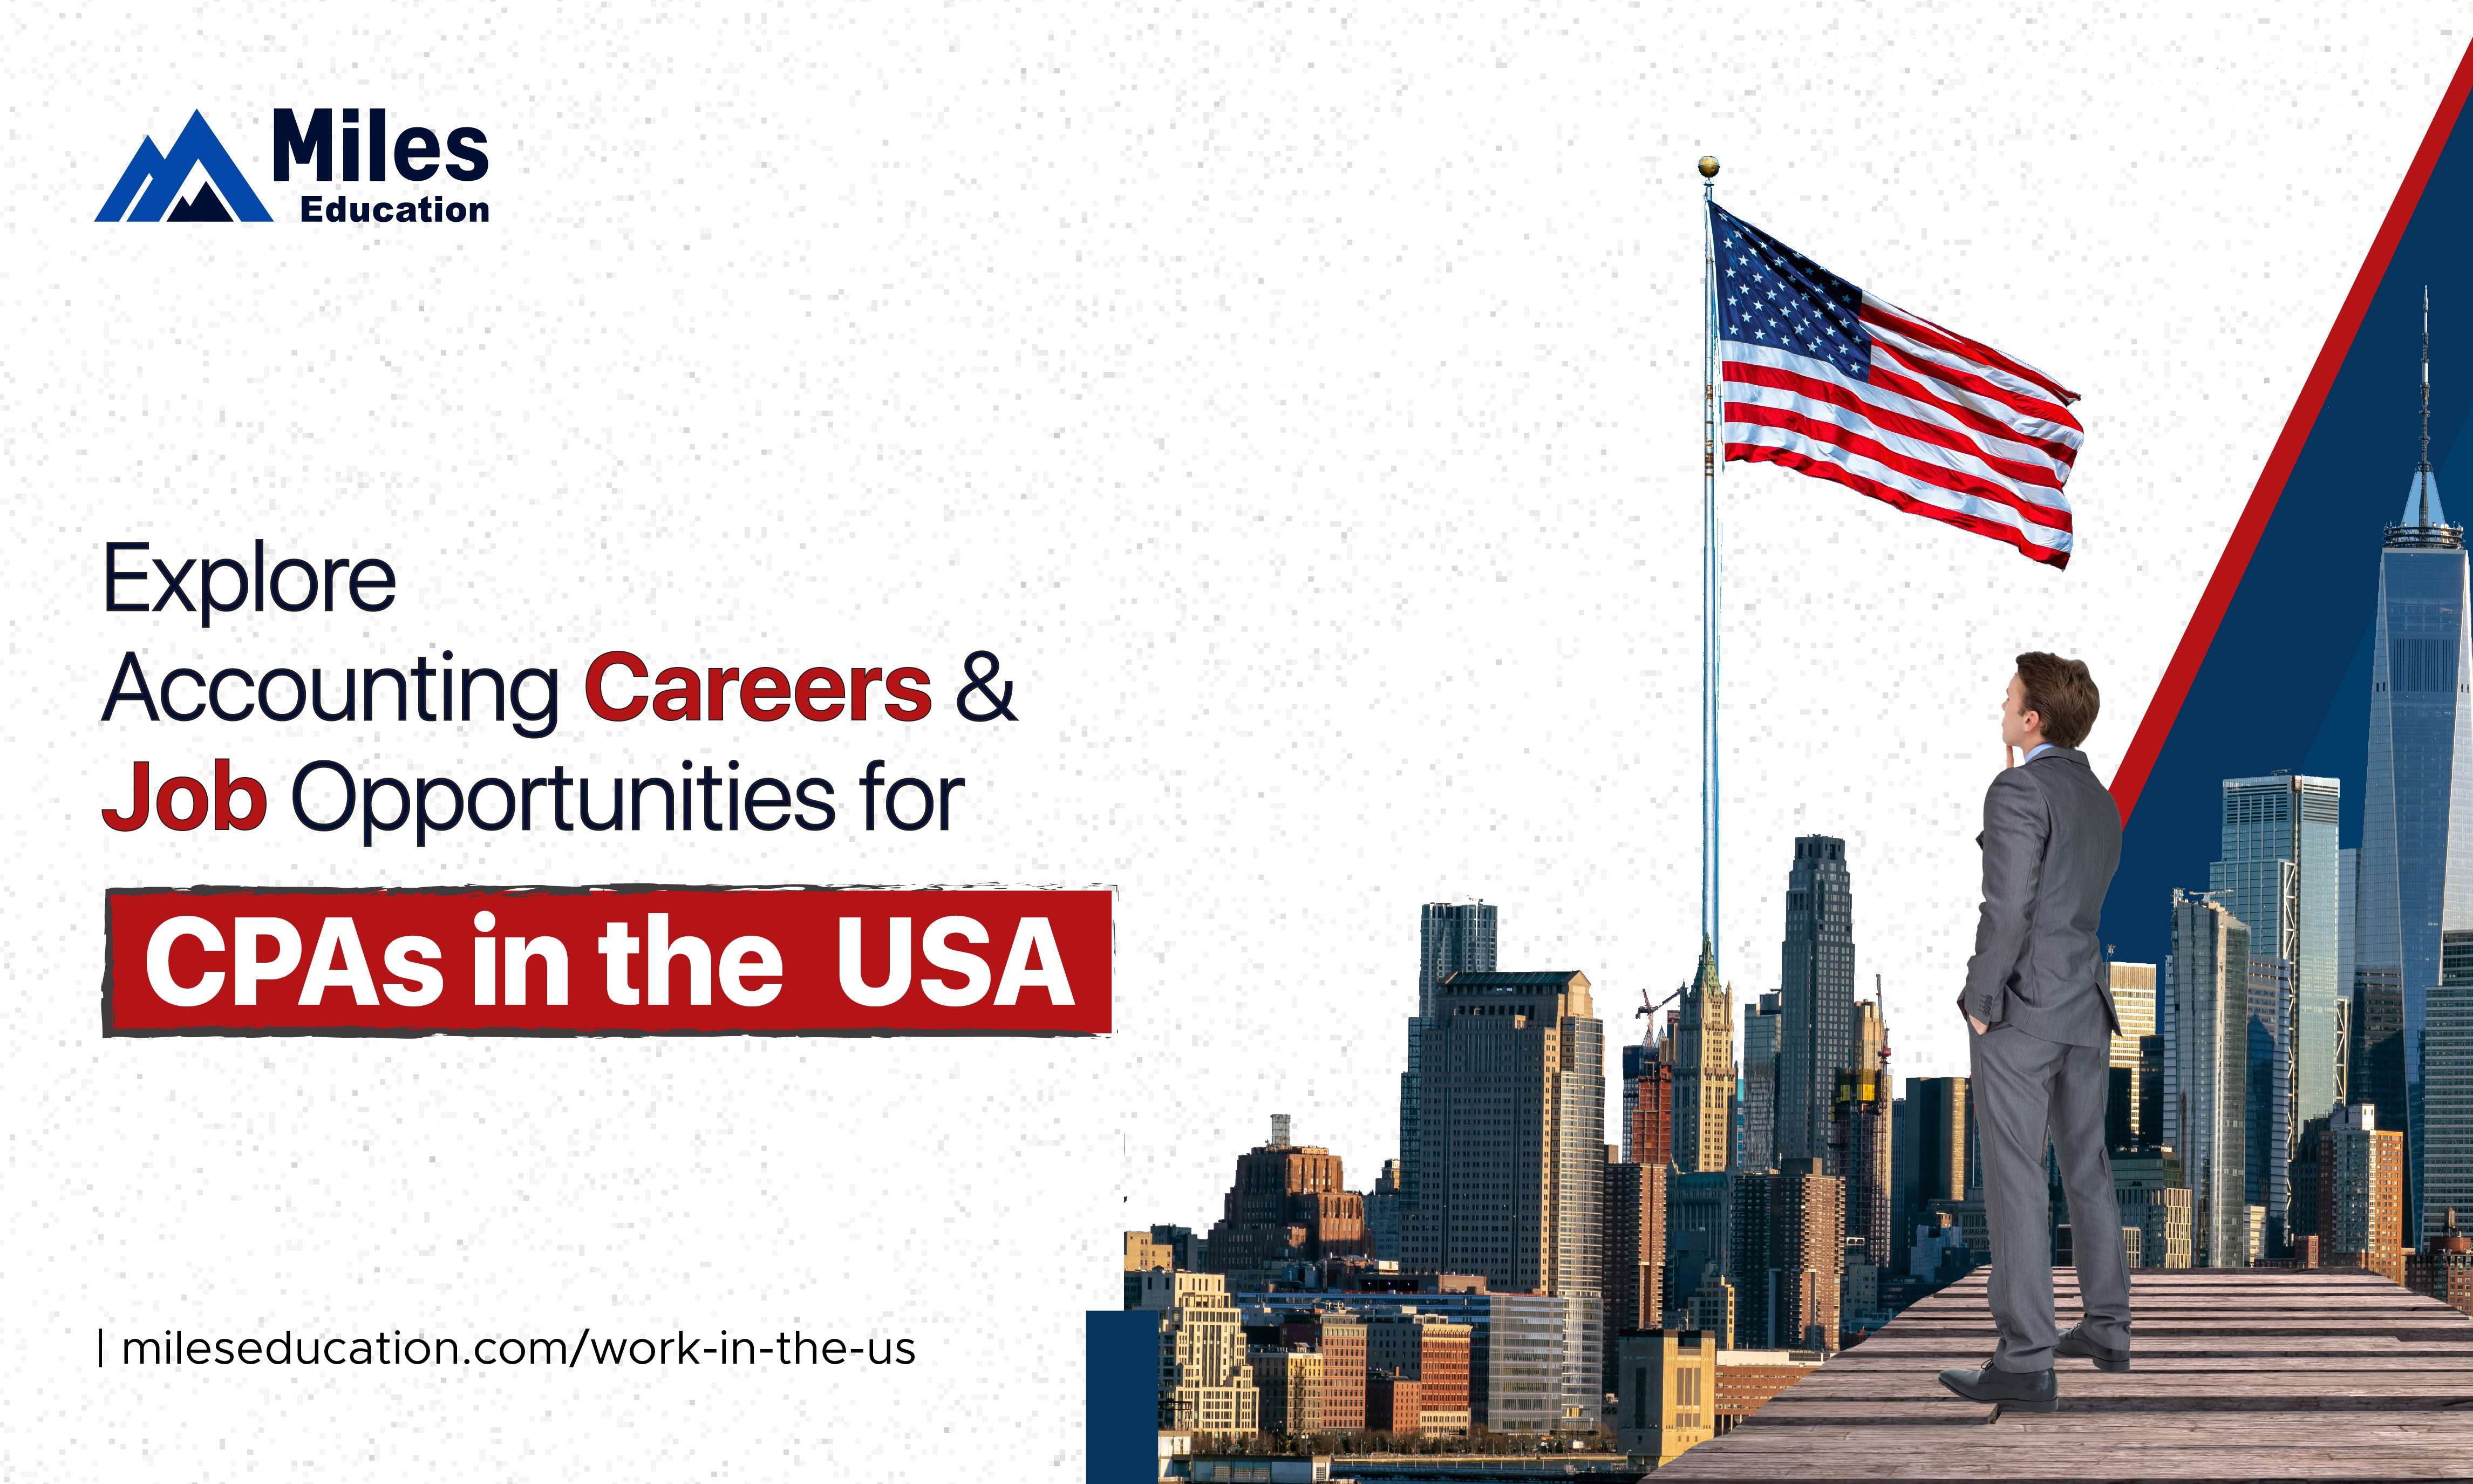 Explore Accounting Careers & Job Opportunities for CPAs in the USA